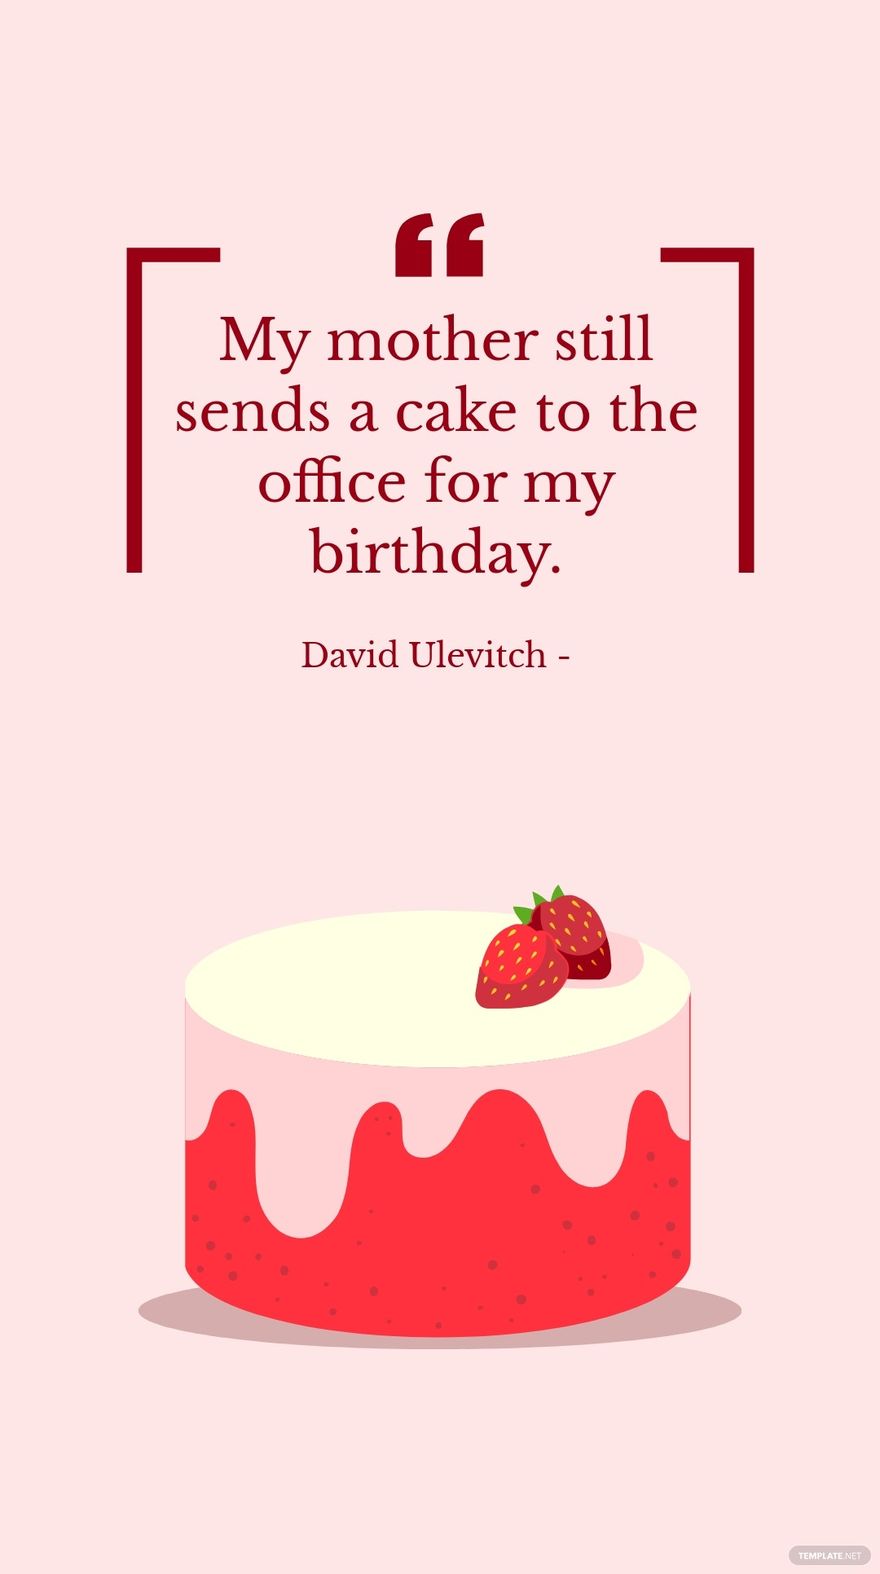 David Ulevitch - My mother still sends a cake to the office for my birthday.